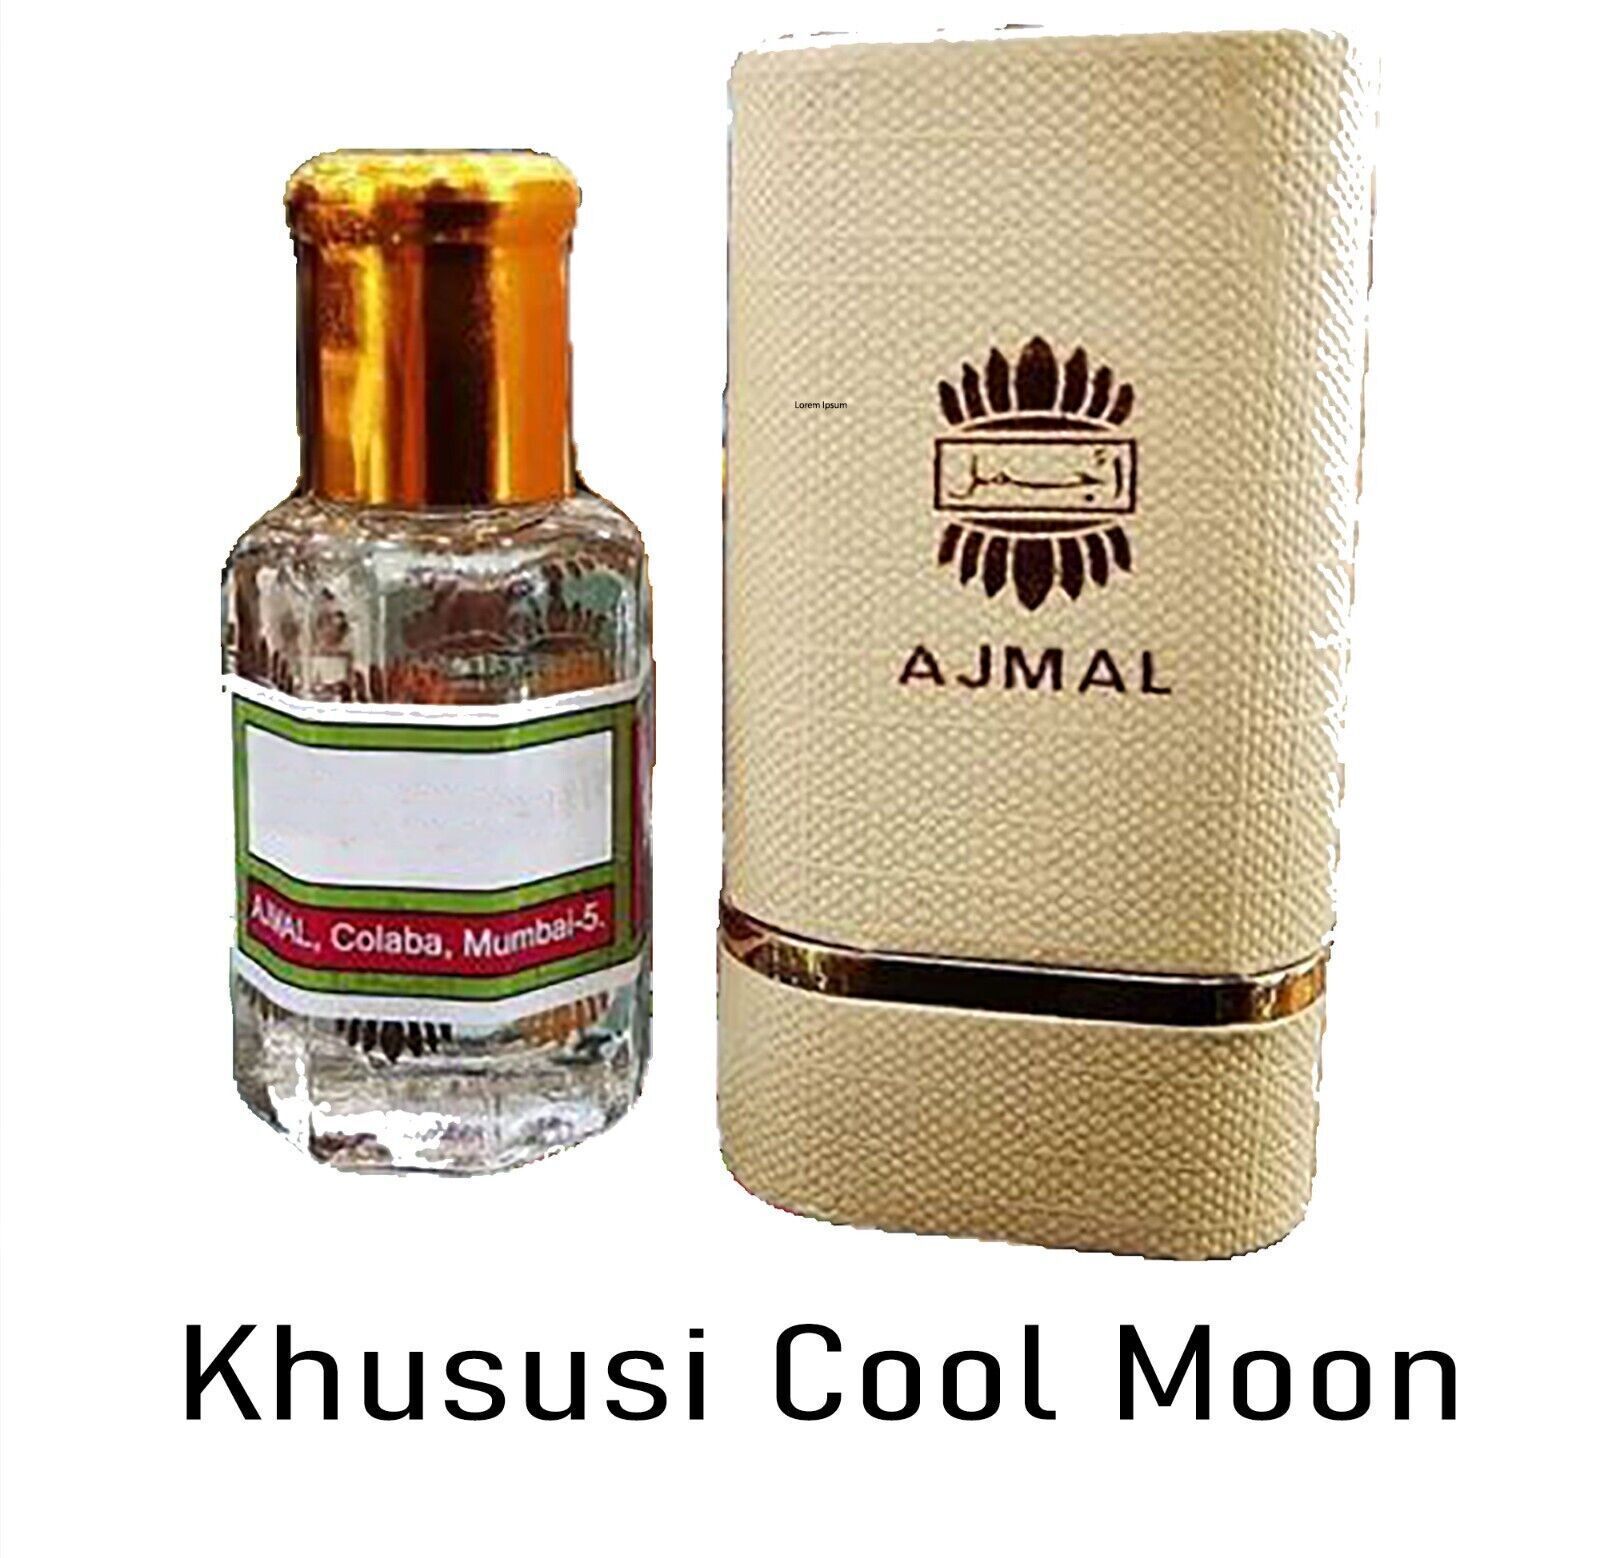 Khususi Cool Moon by Ajmal High Quality Fragrance Oil 12 ML Free Shipping - $33.27